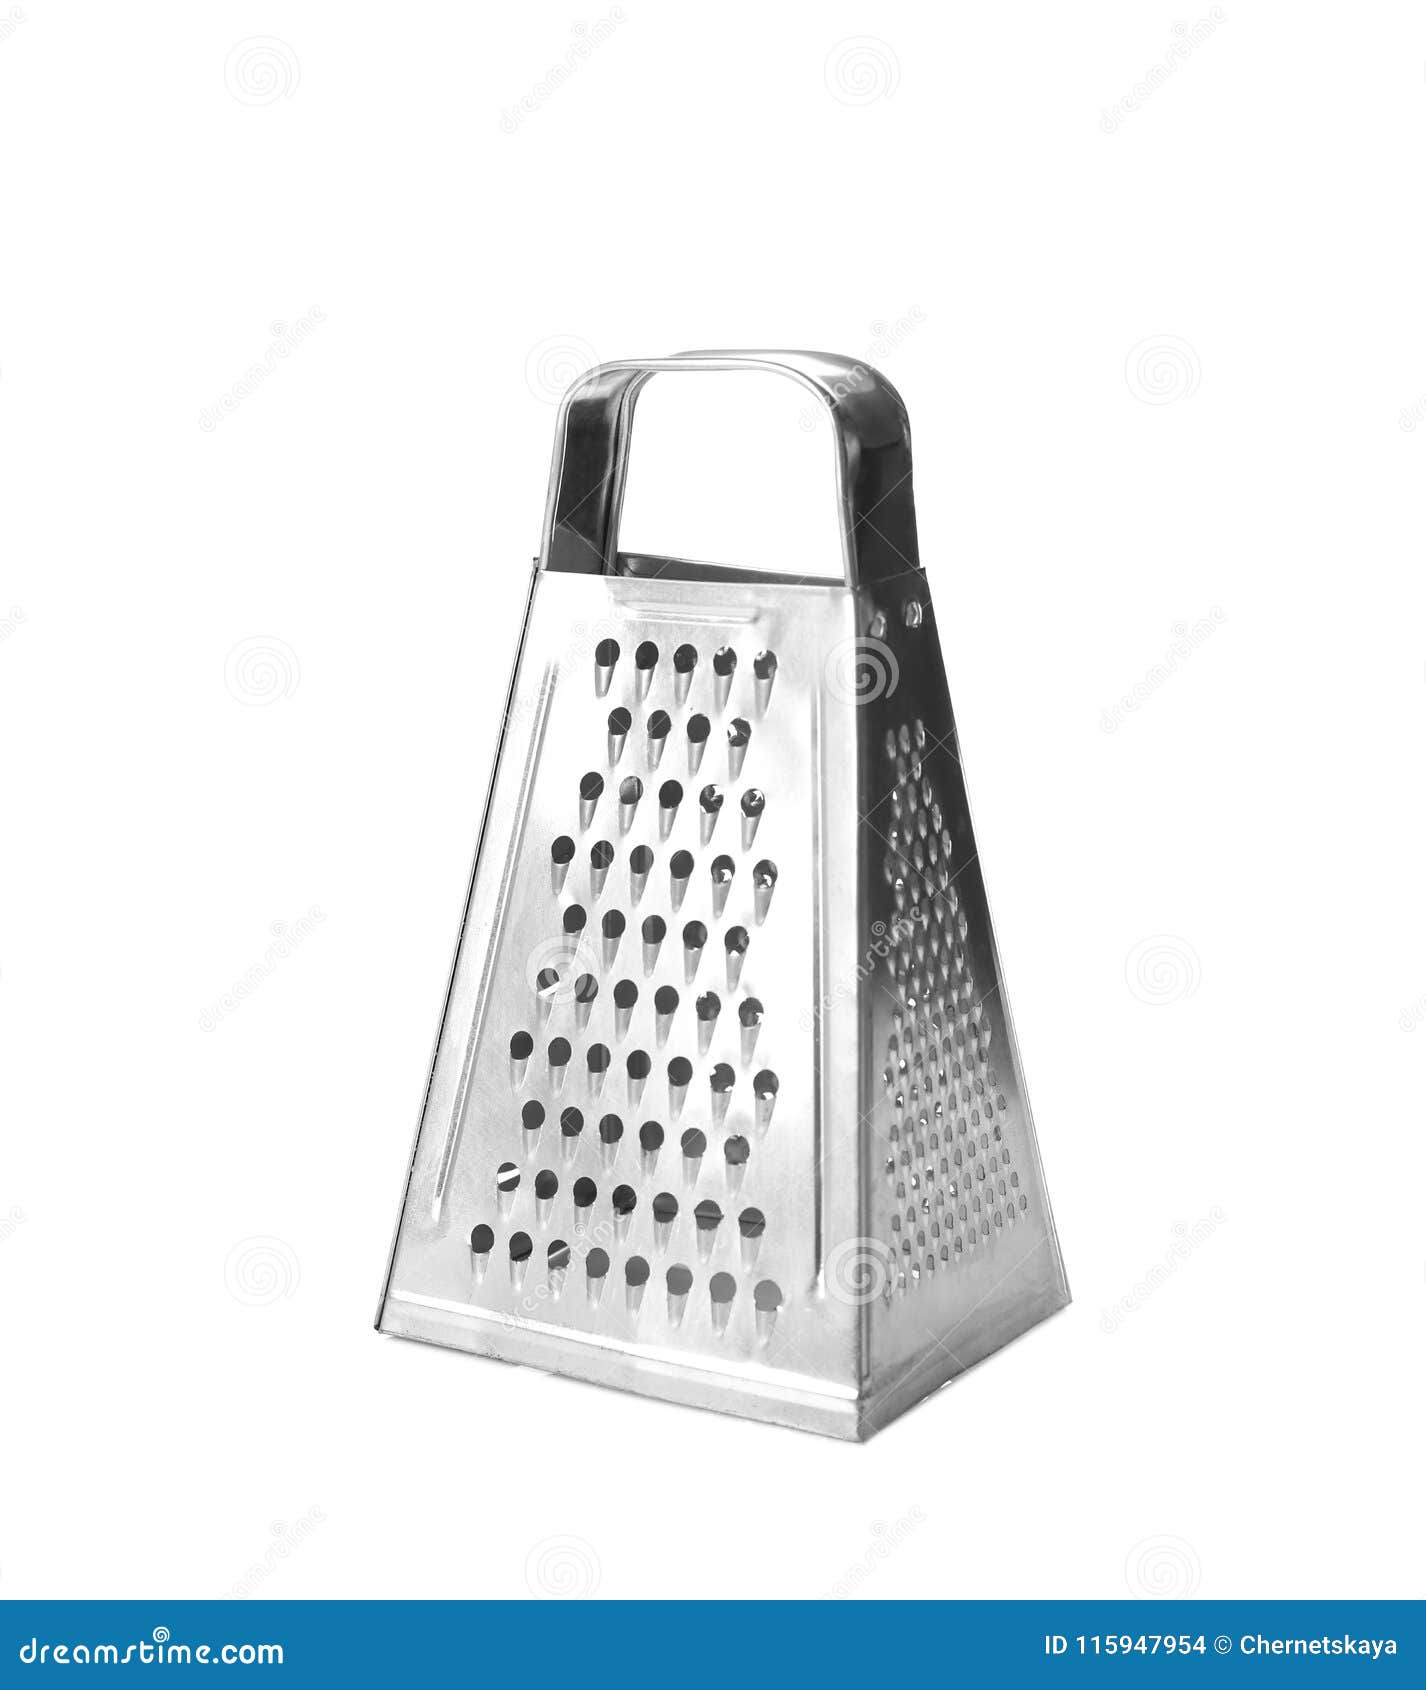 https://thumbs.dreamstime.com/z/cheese-grater-isolated-cheese-grater-isolated-white-115947954.jpg